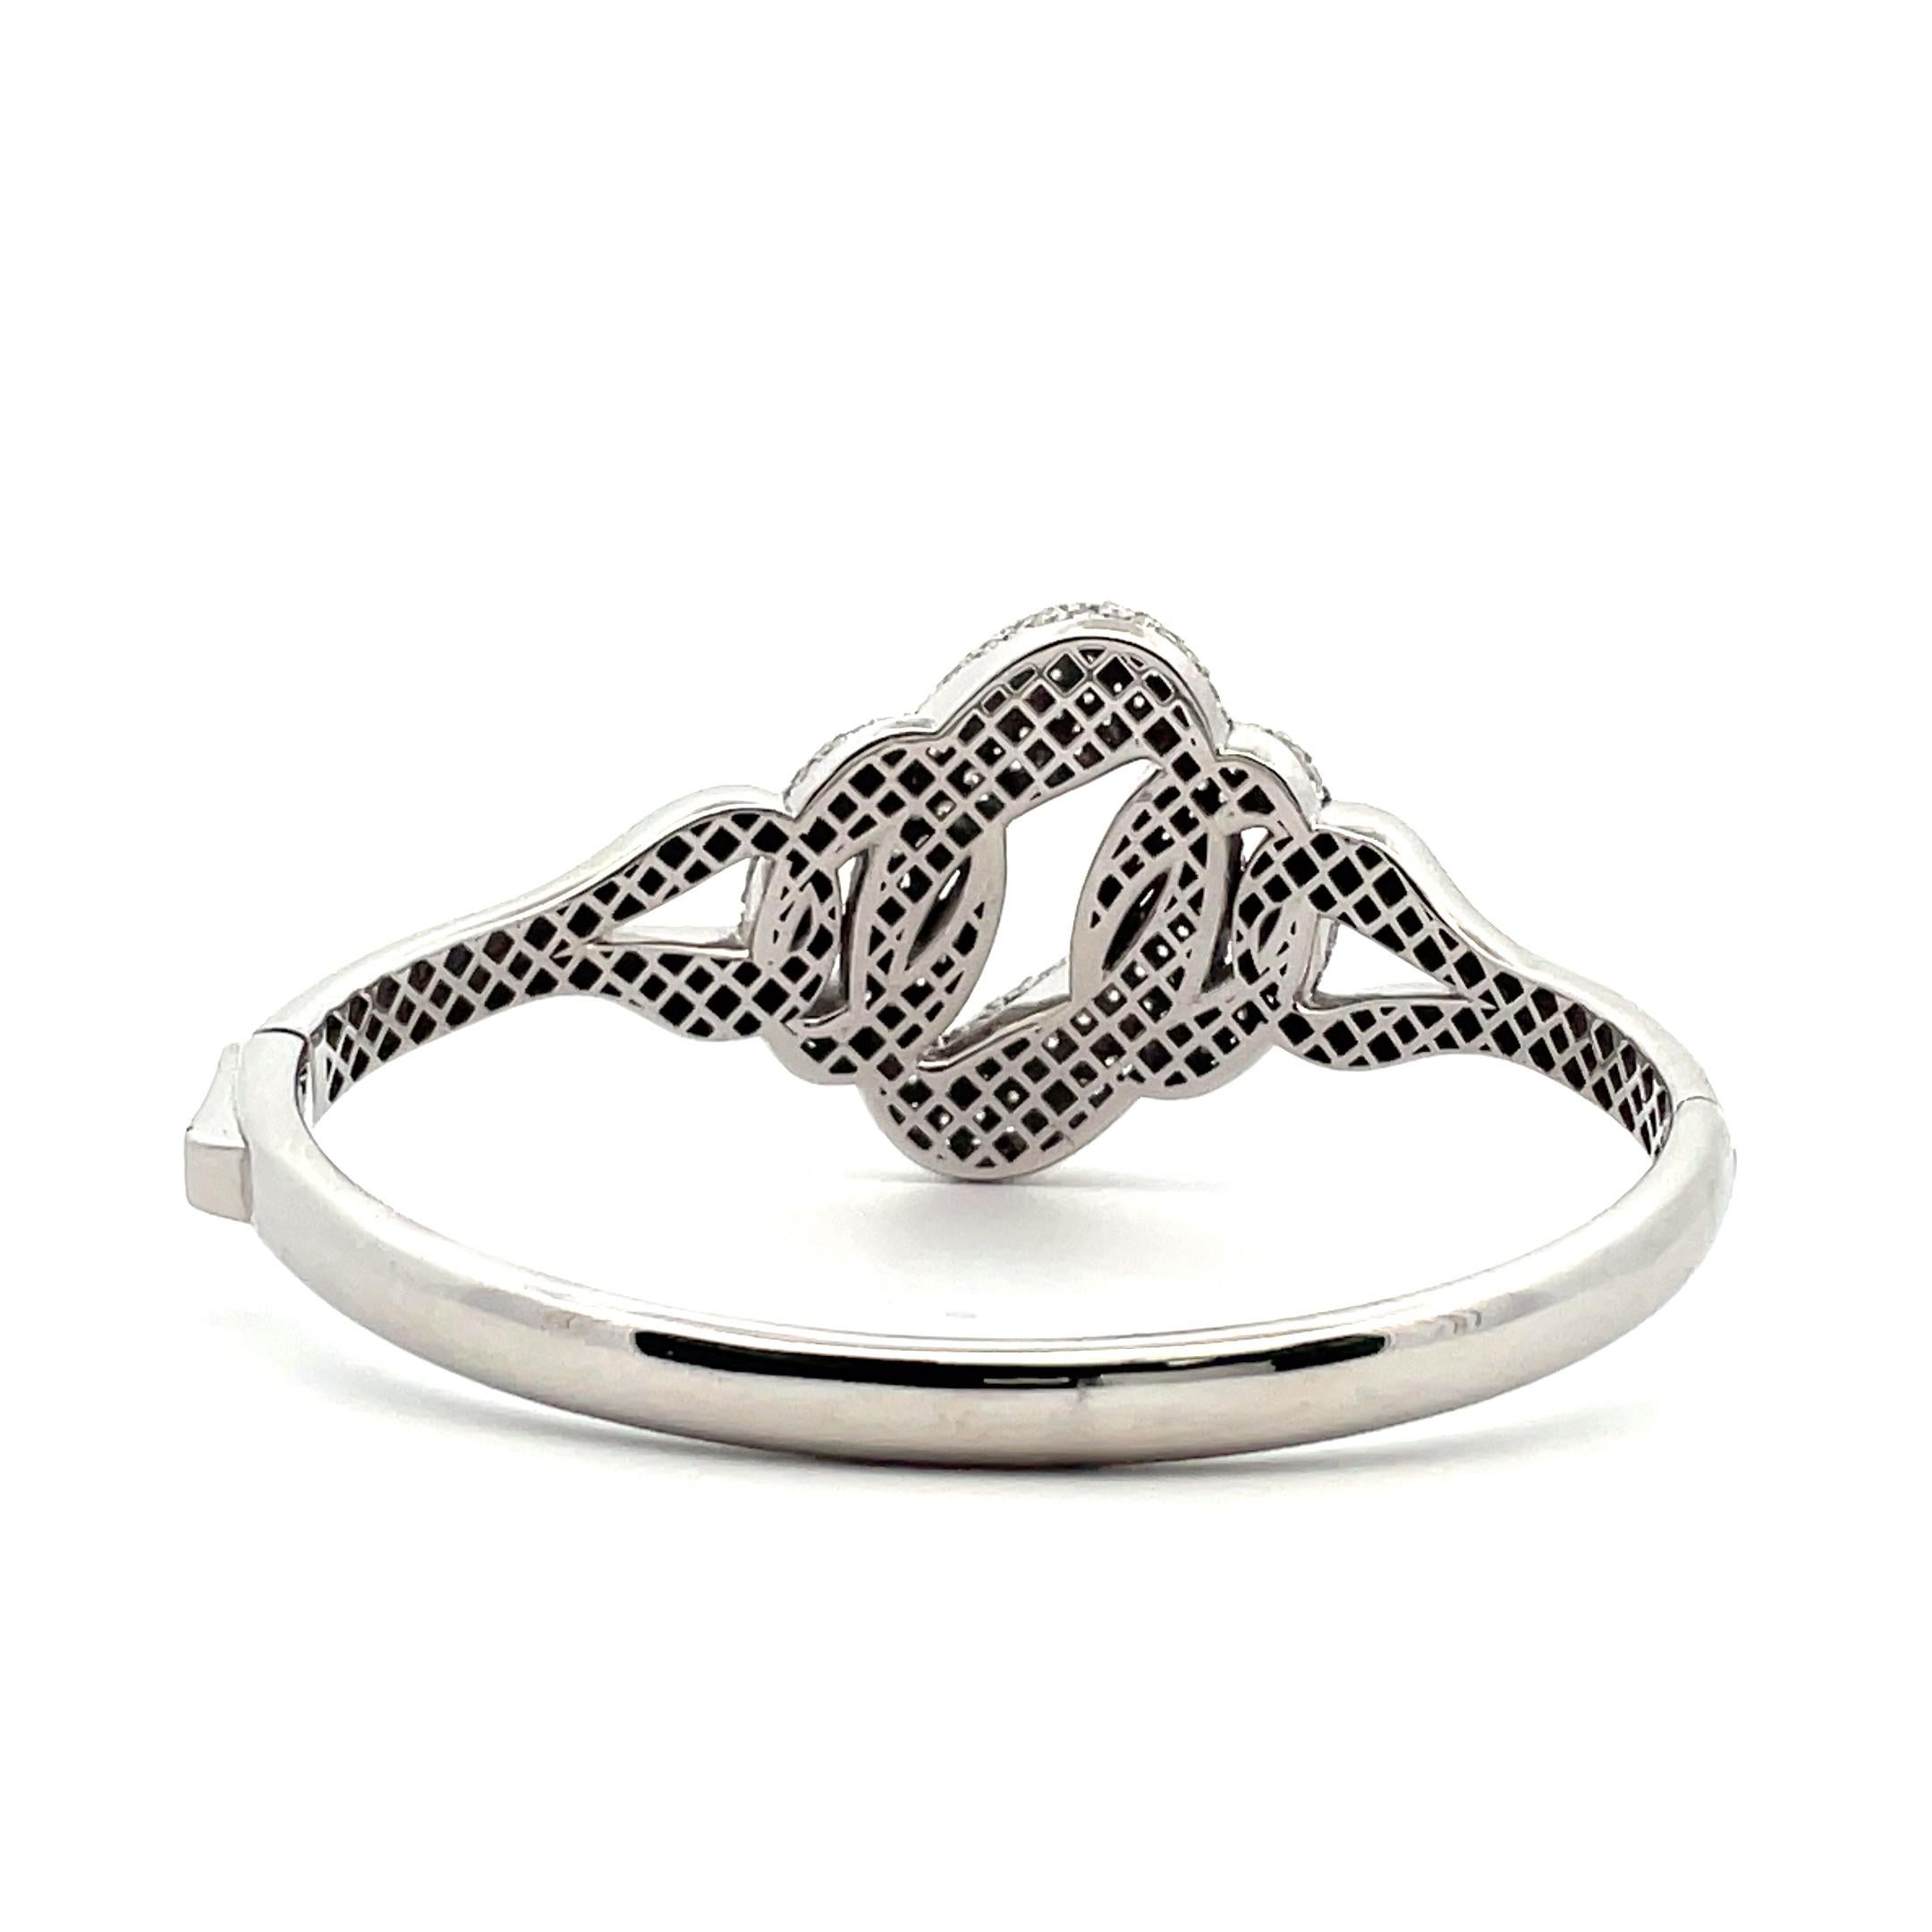 Art Deco 4.93ct, Diamond Cluster Knot Chain Link Bangle in 14k White Gold